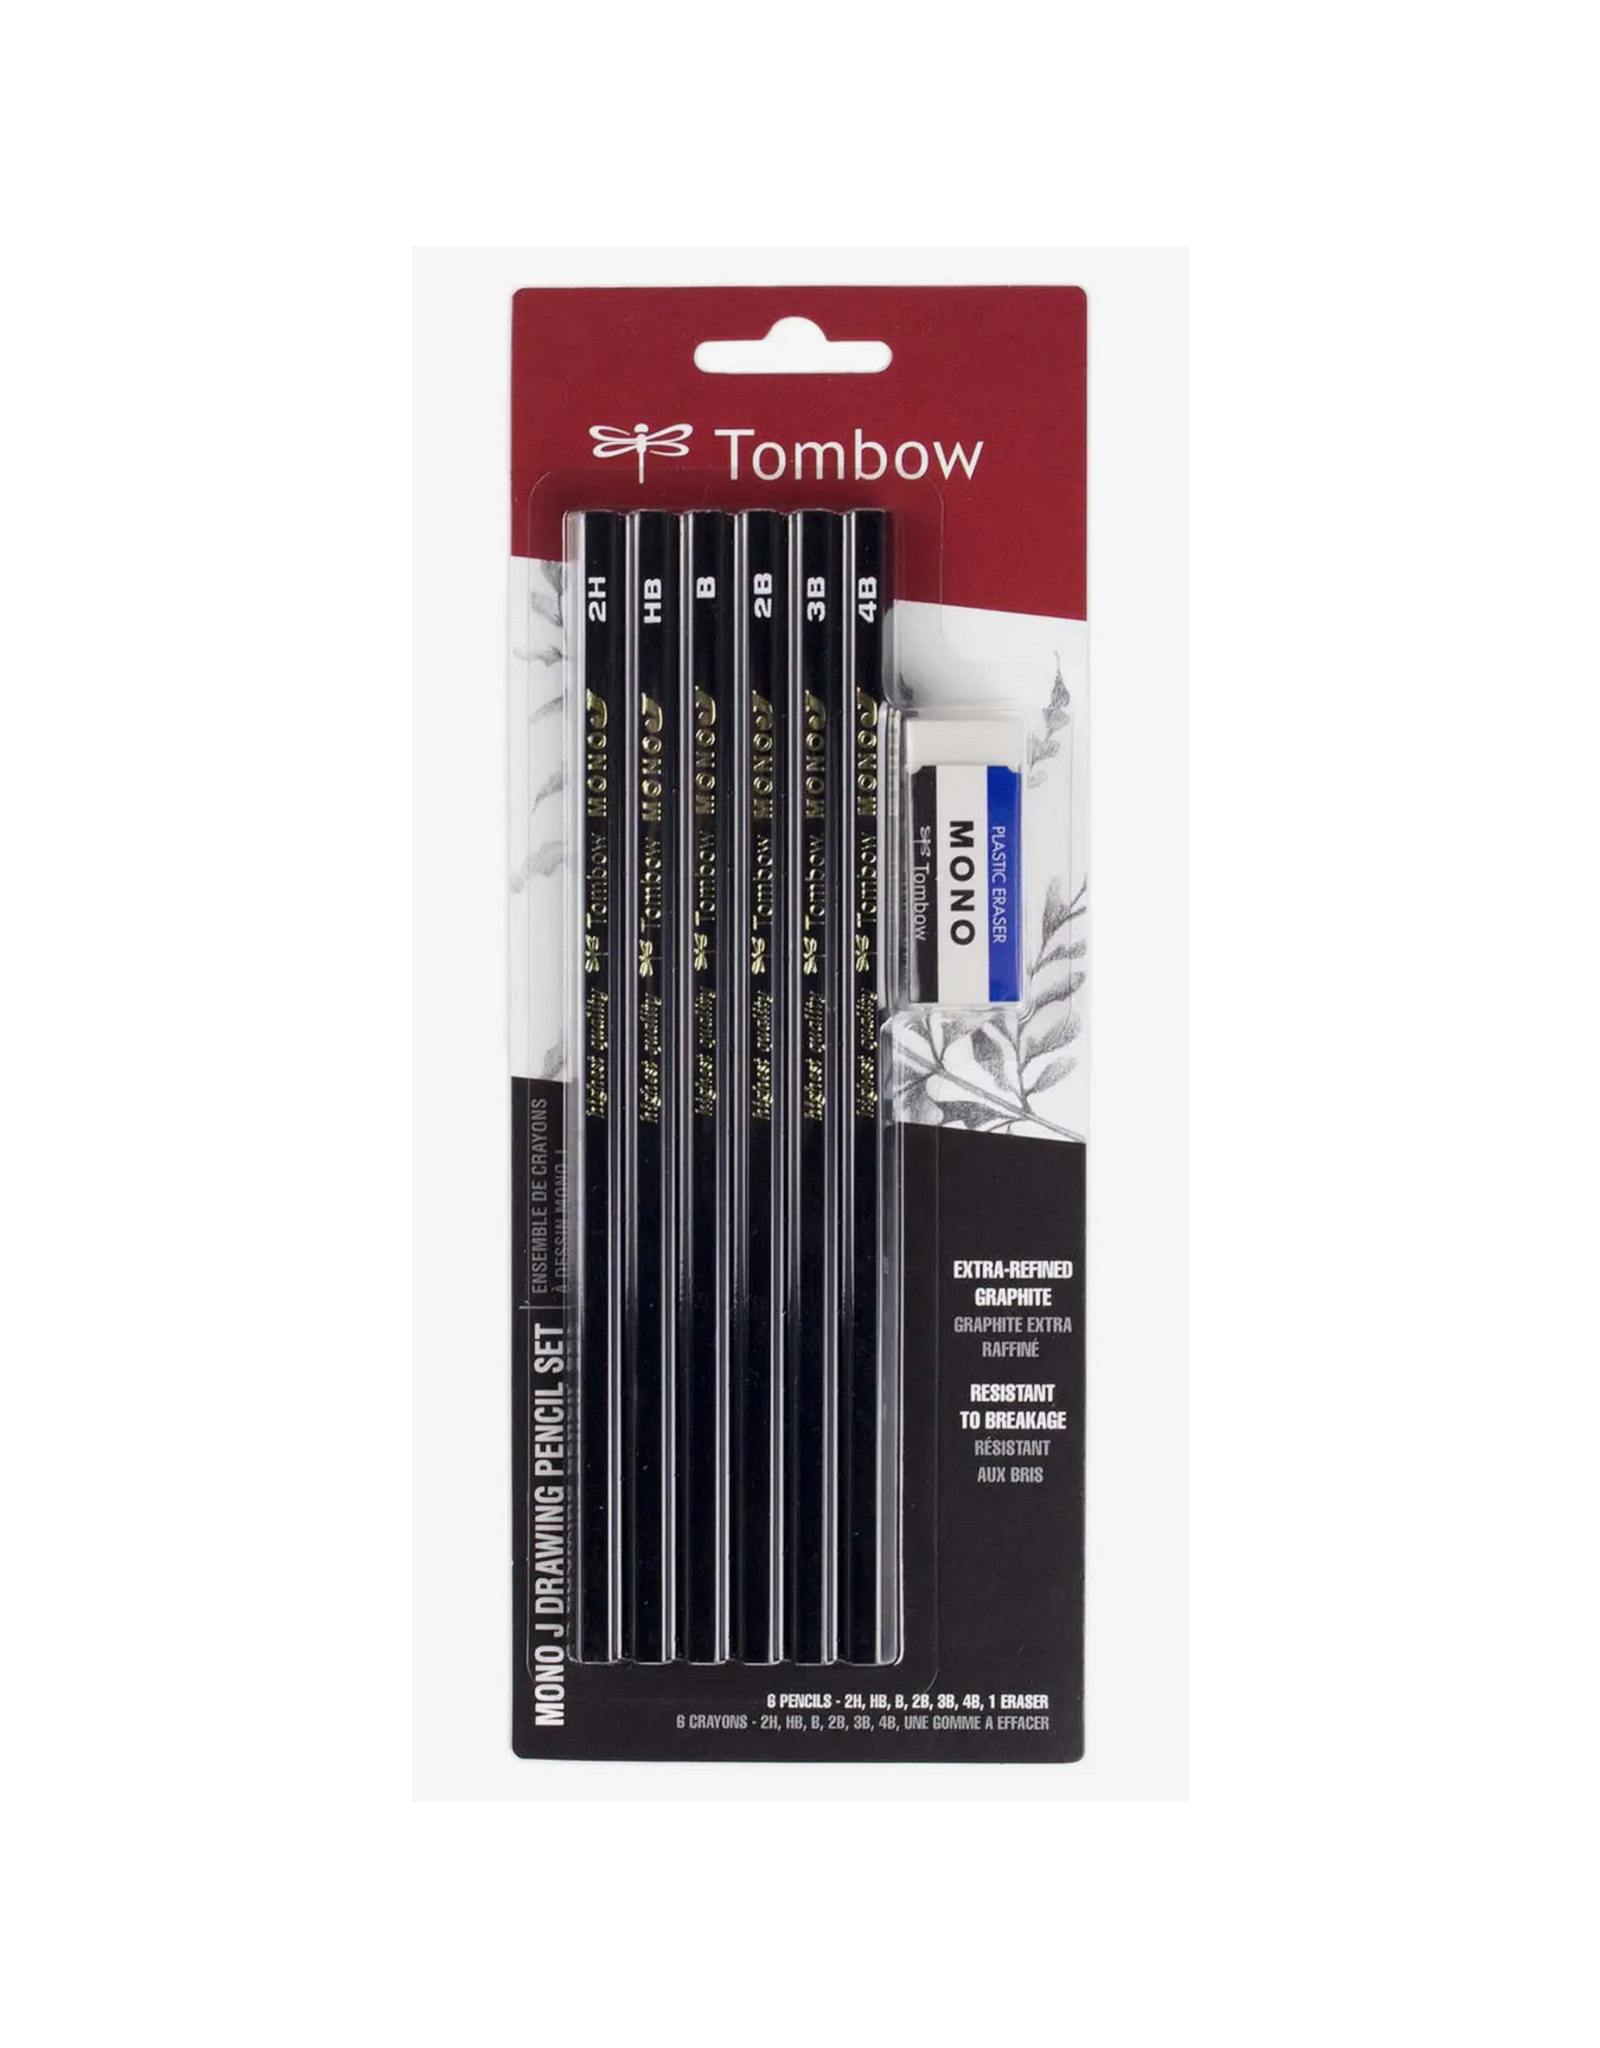 Professional Drawing Pencil Sketch Kit, Tombow MONO Drawing Kit, Pencil  Set, Sketching, Illustration, Scrapbooking, Anime, Manga Affordable 